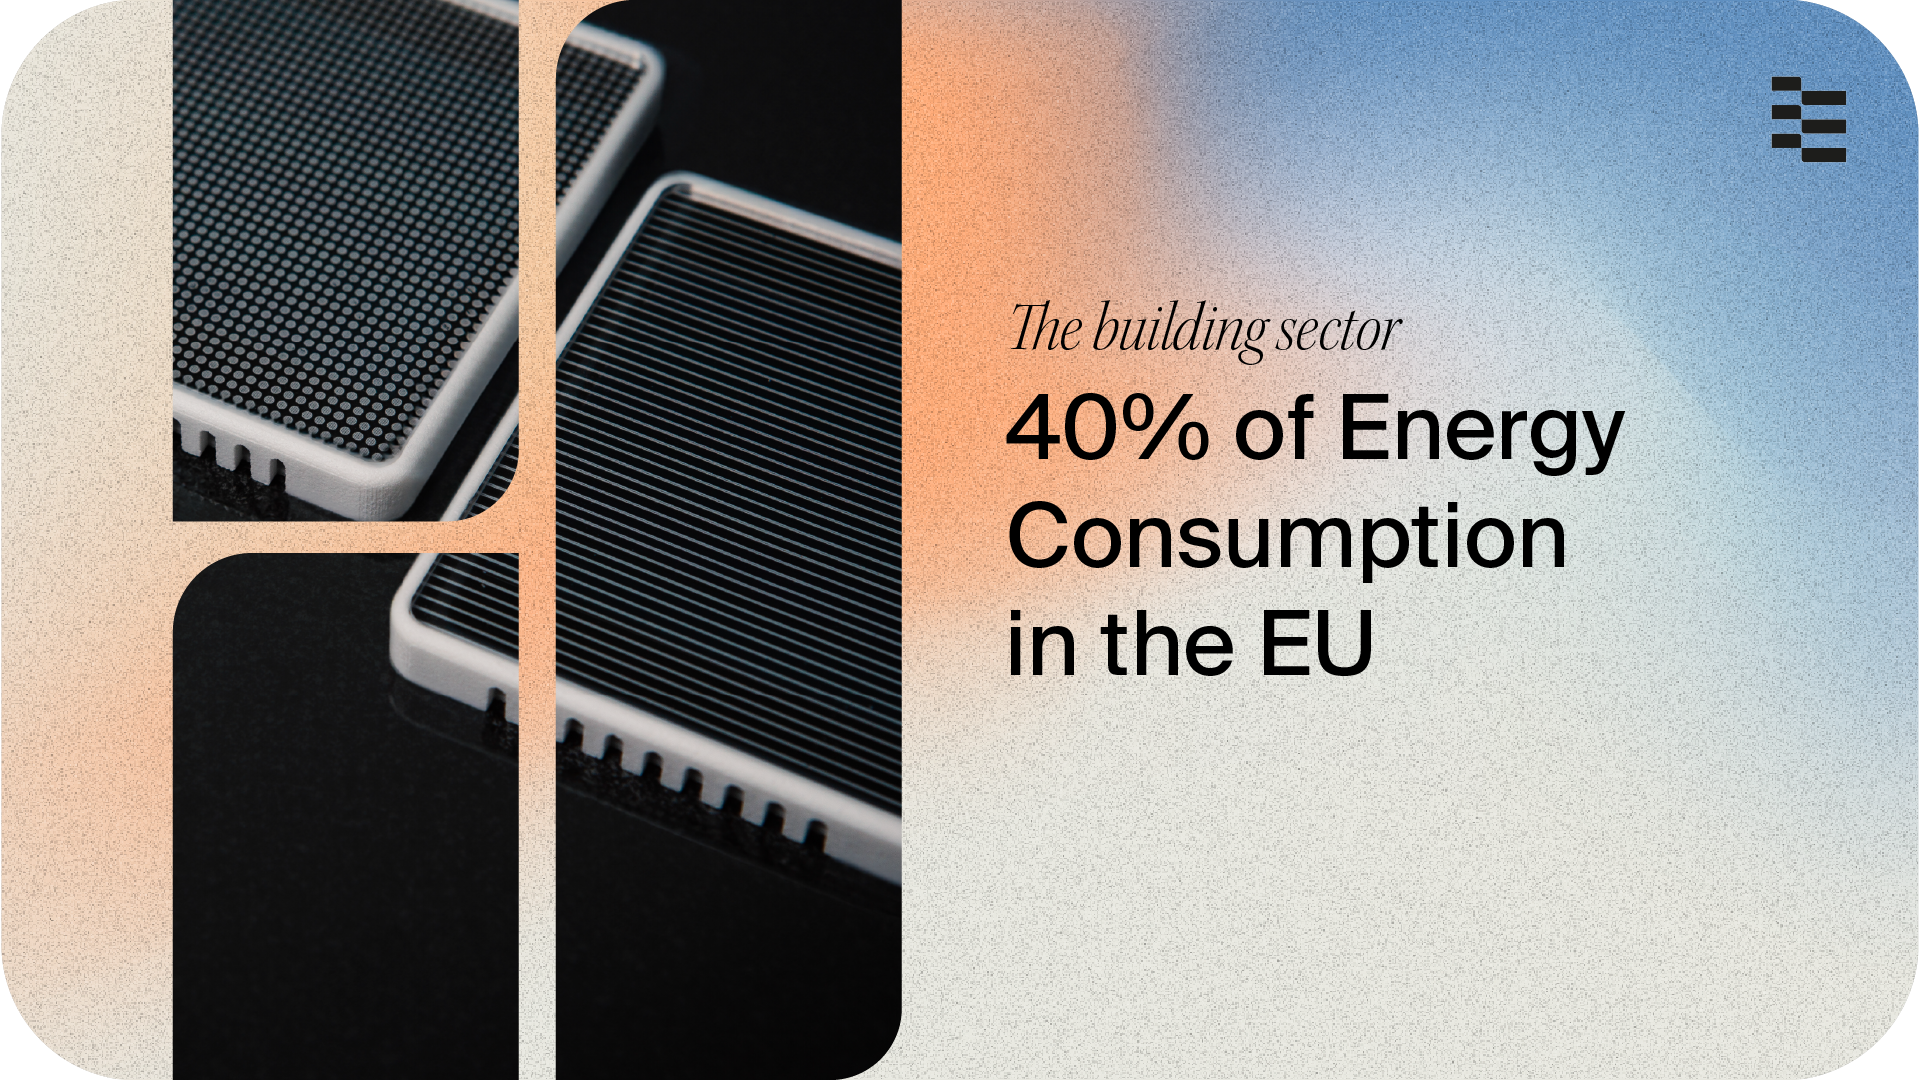 40% of energy consumption in the EU comes from the building sector